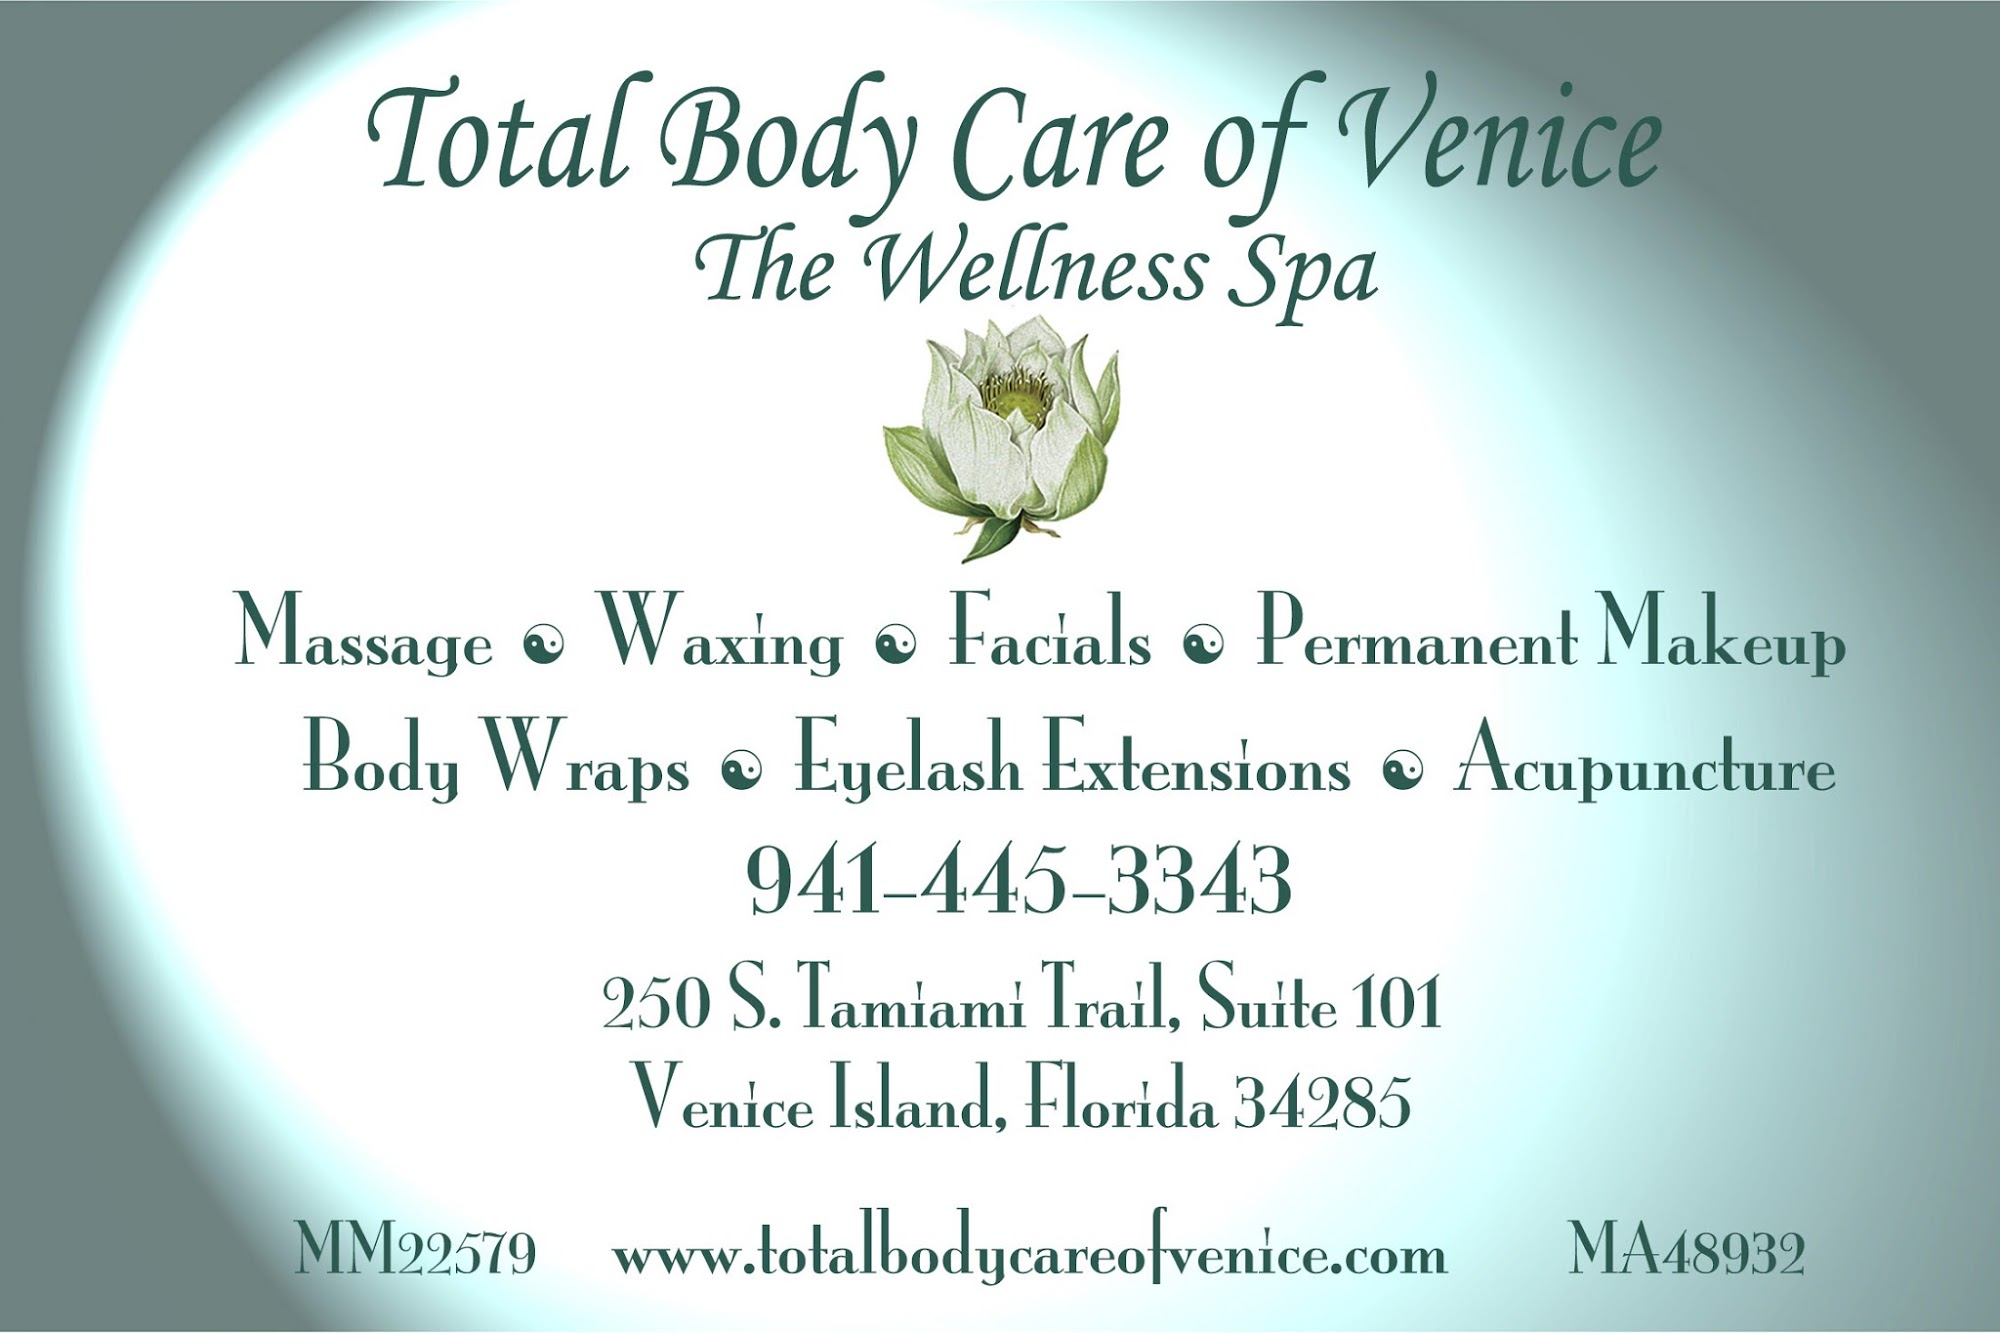 Total Body Care of Venice